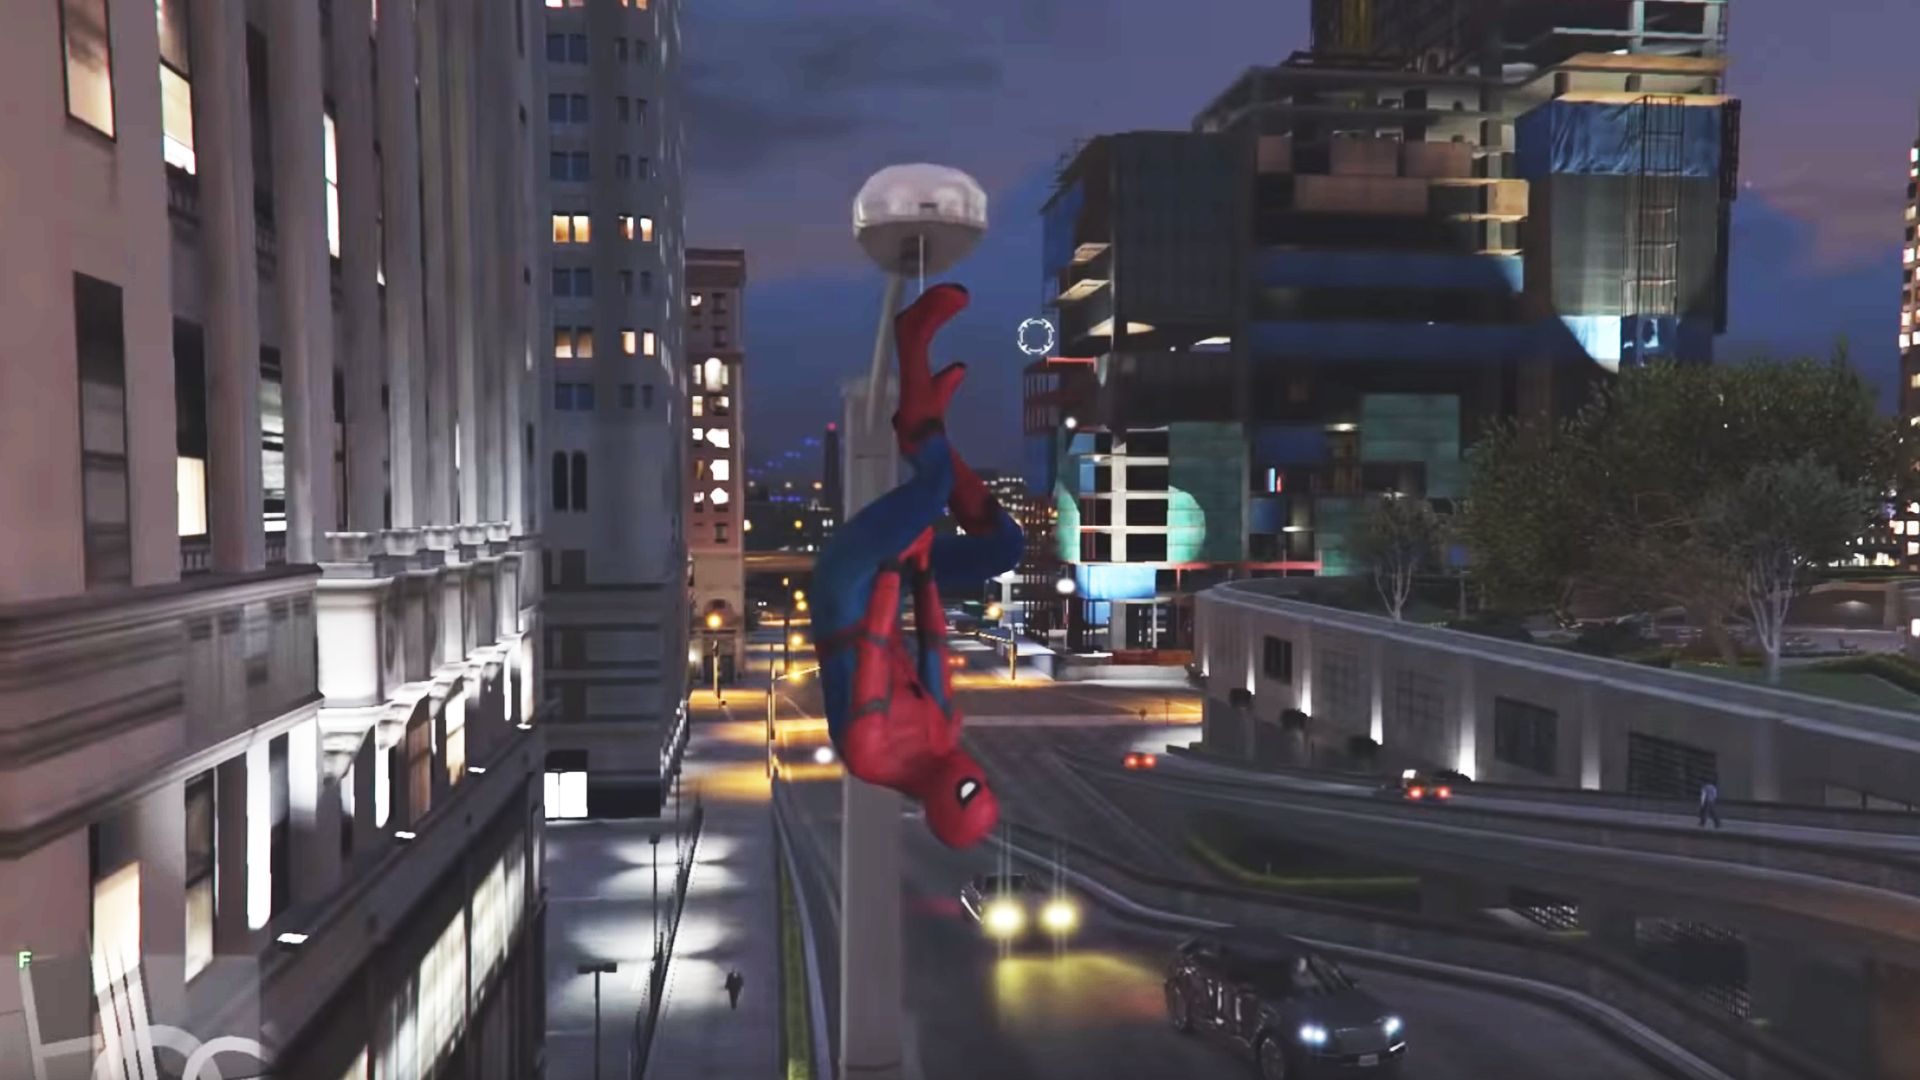 Spider-Man hits the streets of Los Santos in this Grand Theft Auto V mod